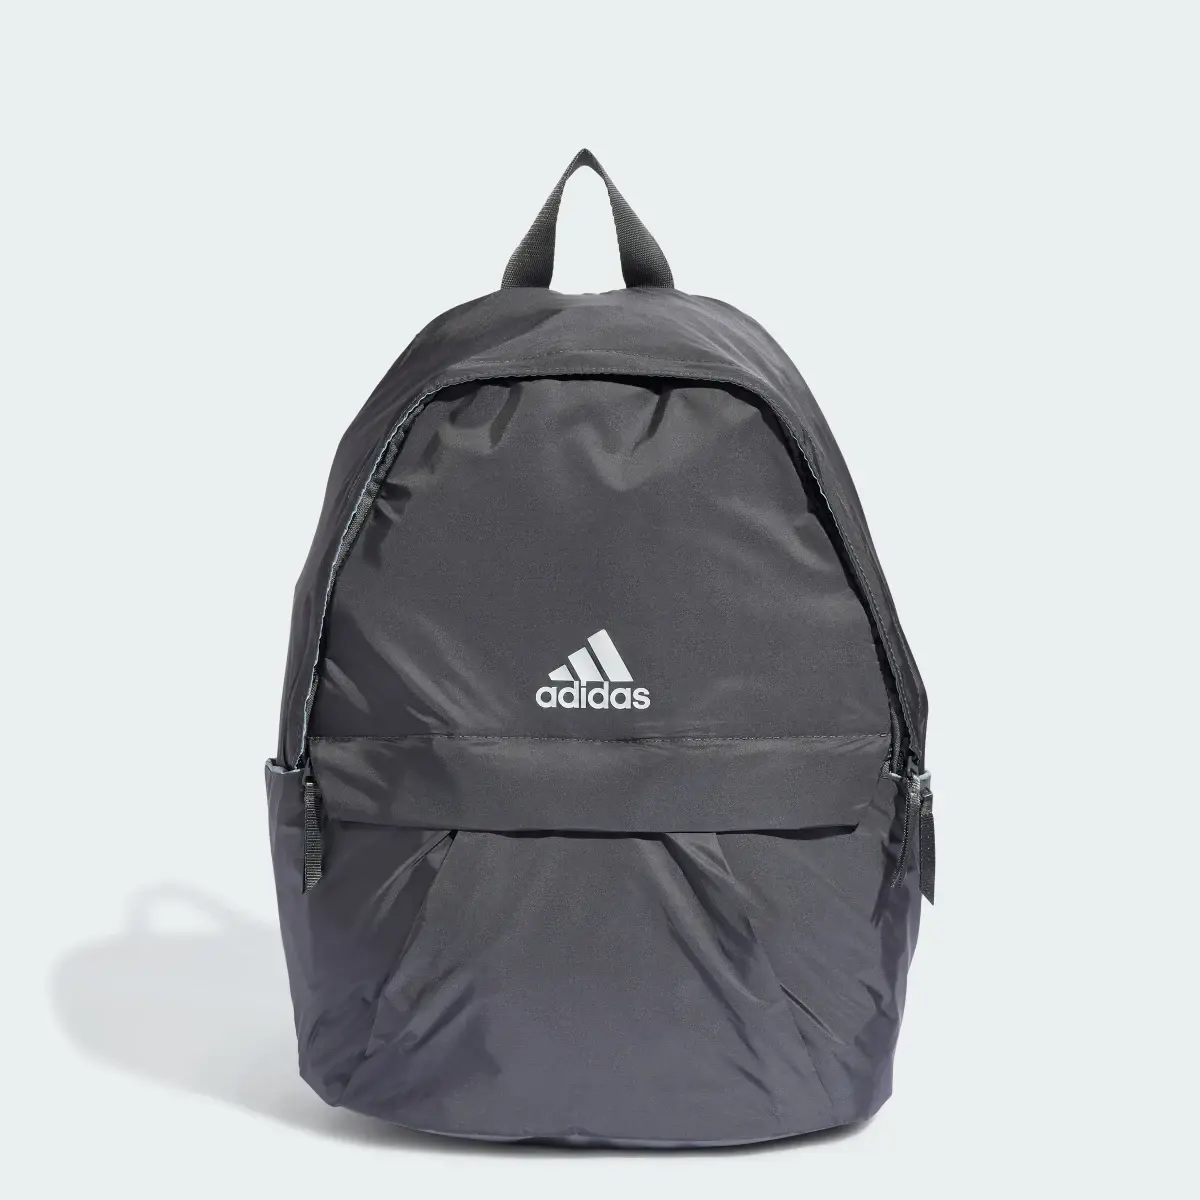 Adidas Classic Gen Z Backpack. 1